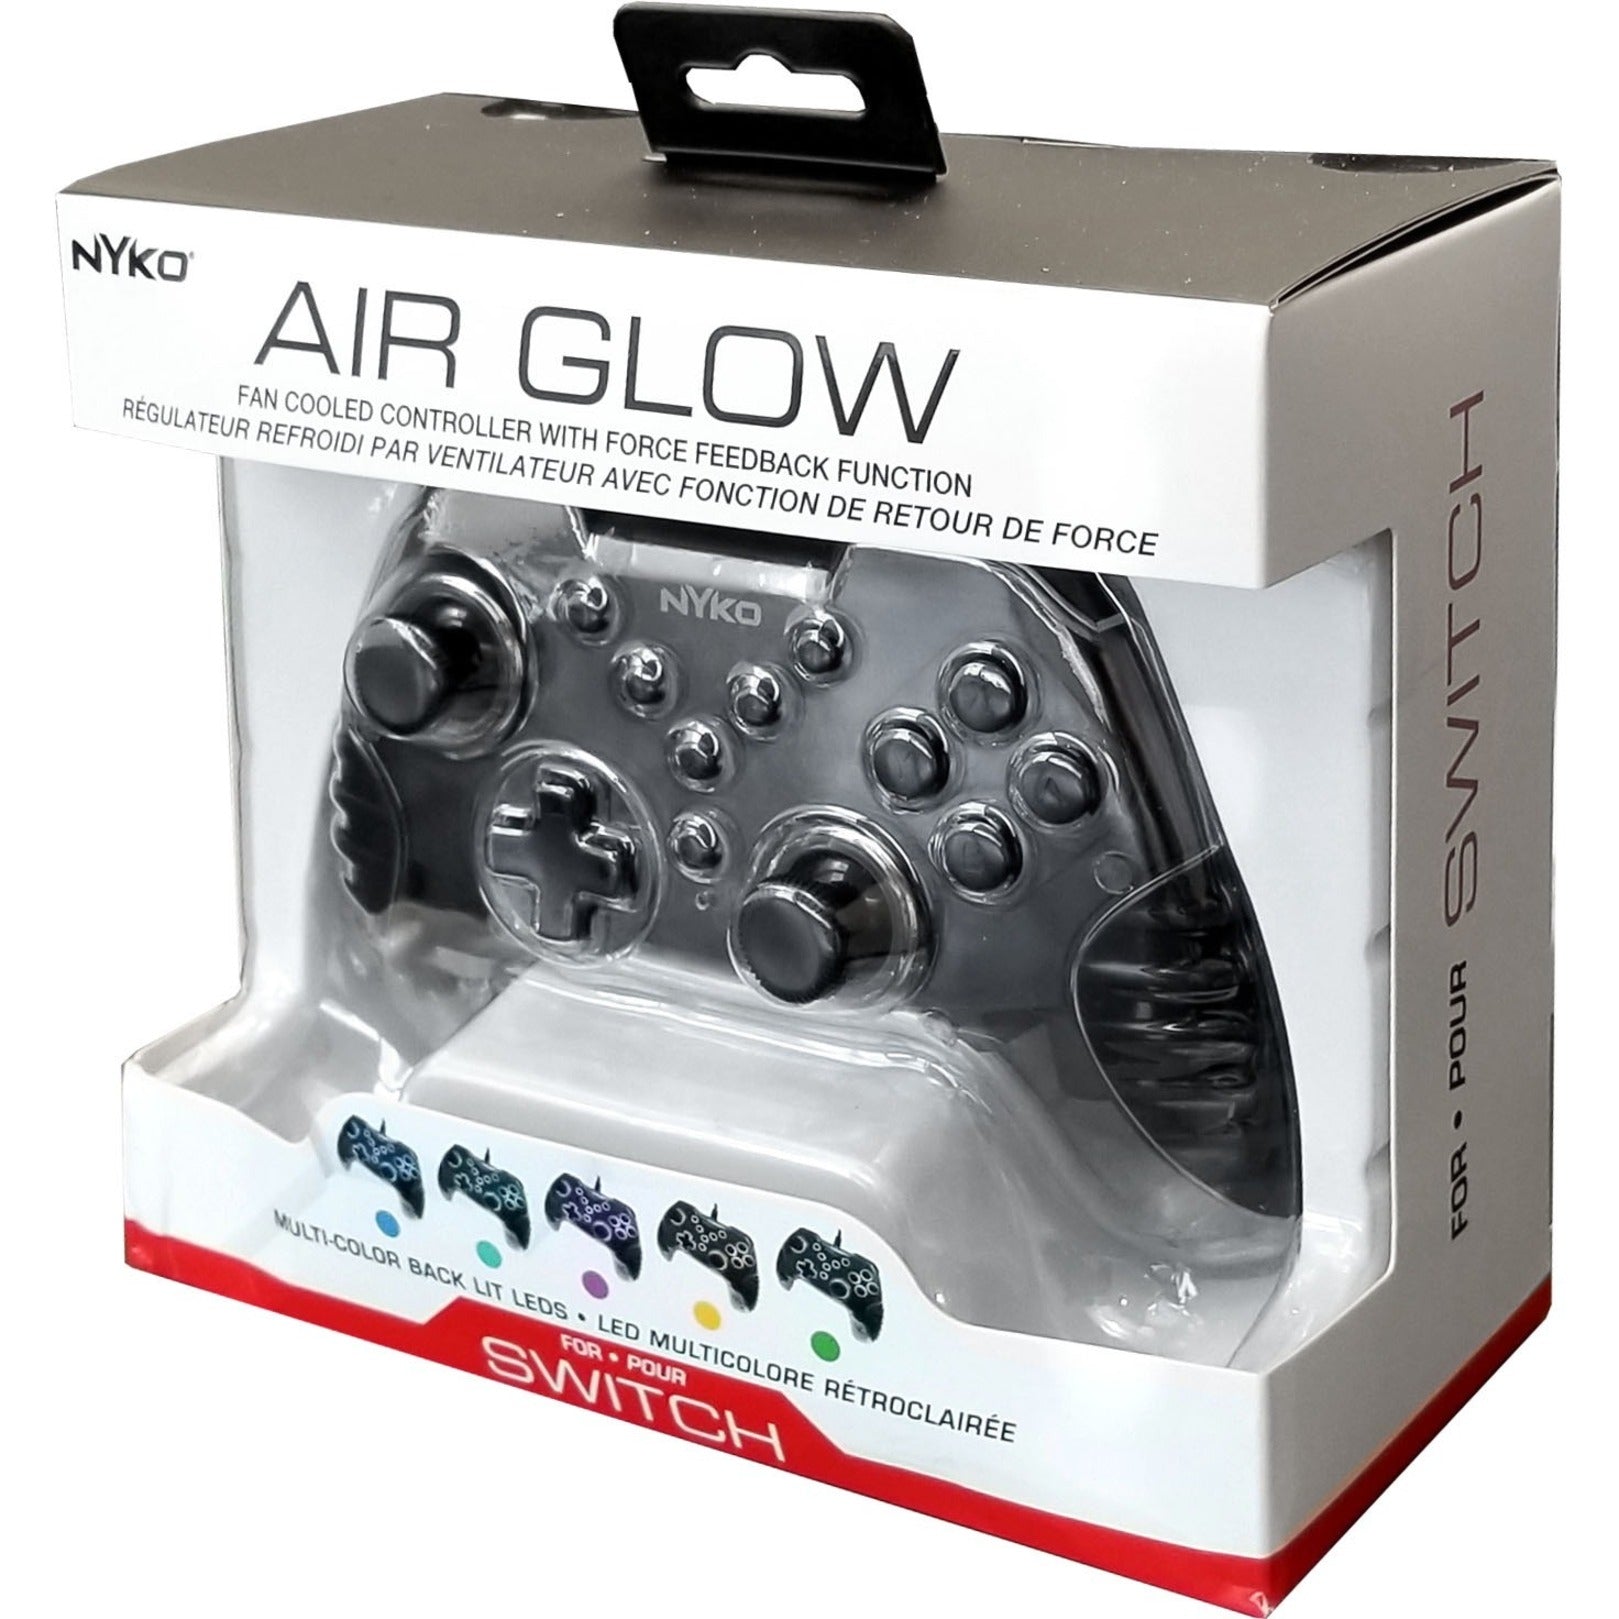 Nyko 87303 Air Glow Wired Controller for Nintendo Switch, 10 ft Cable, Force Feedback, Capture Button, Home Button, LED Light Button, Fan Button